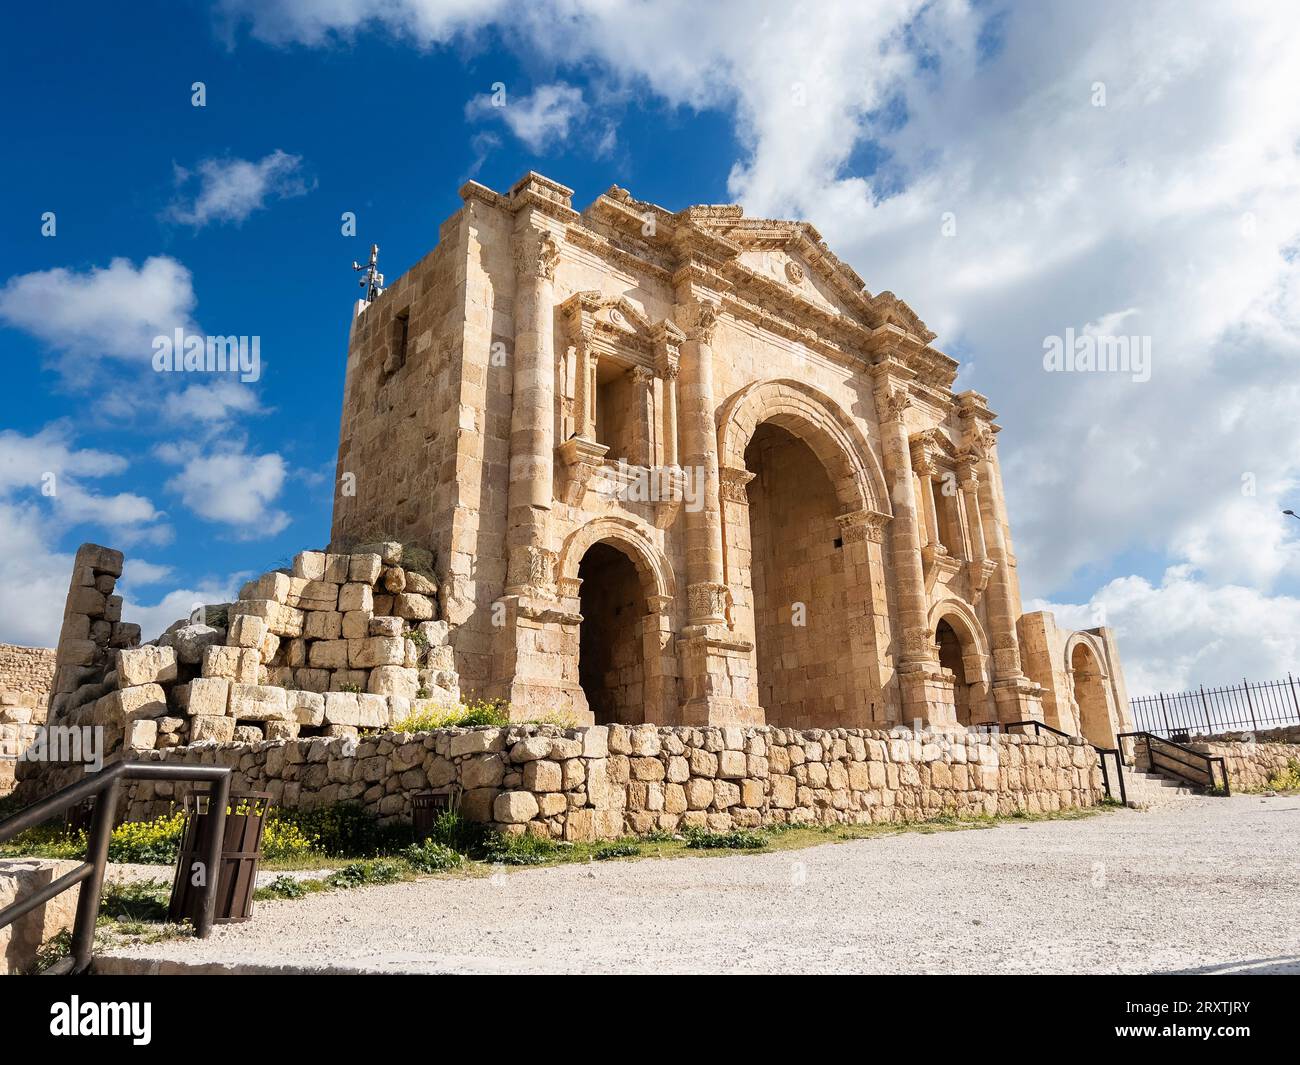 The Arch of Hadrian in Jerash, believed to have been founded in 331 BC by Alexander the Great, Jerash, Jordan, Middle East Stock Photo